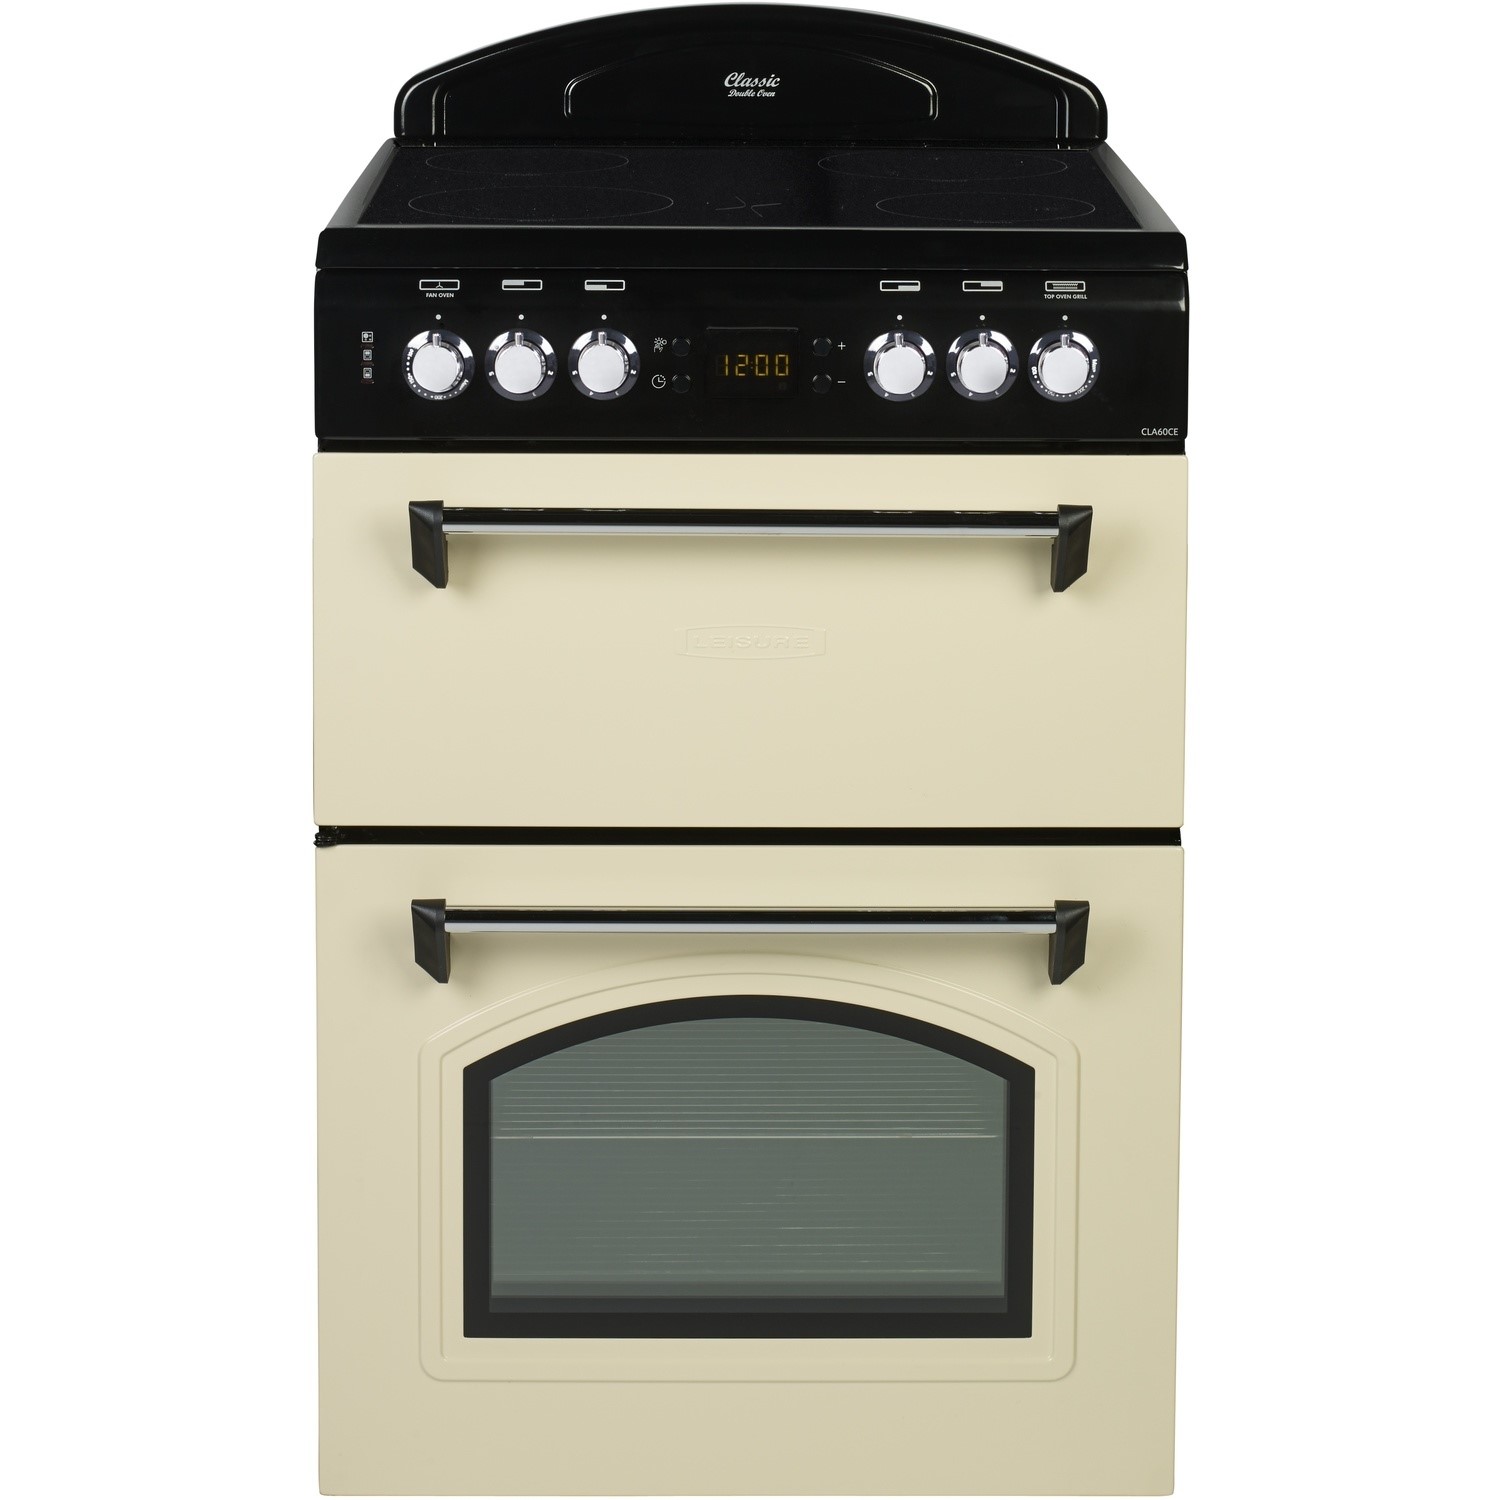 Leisure CLA60CE Classic Electric Double Cooker